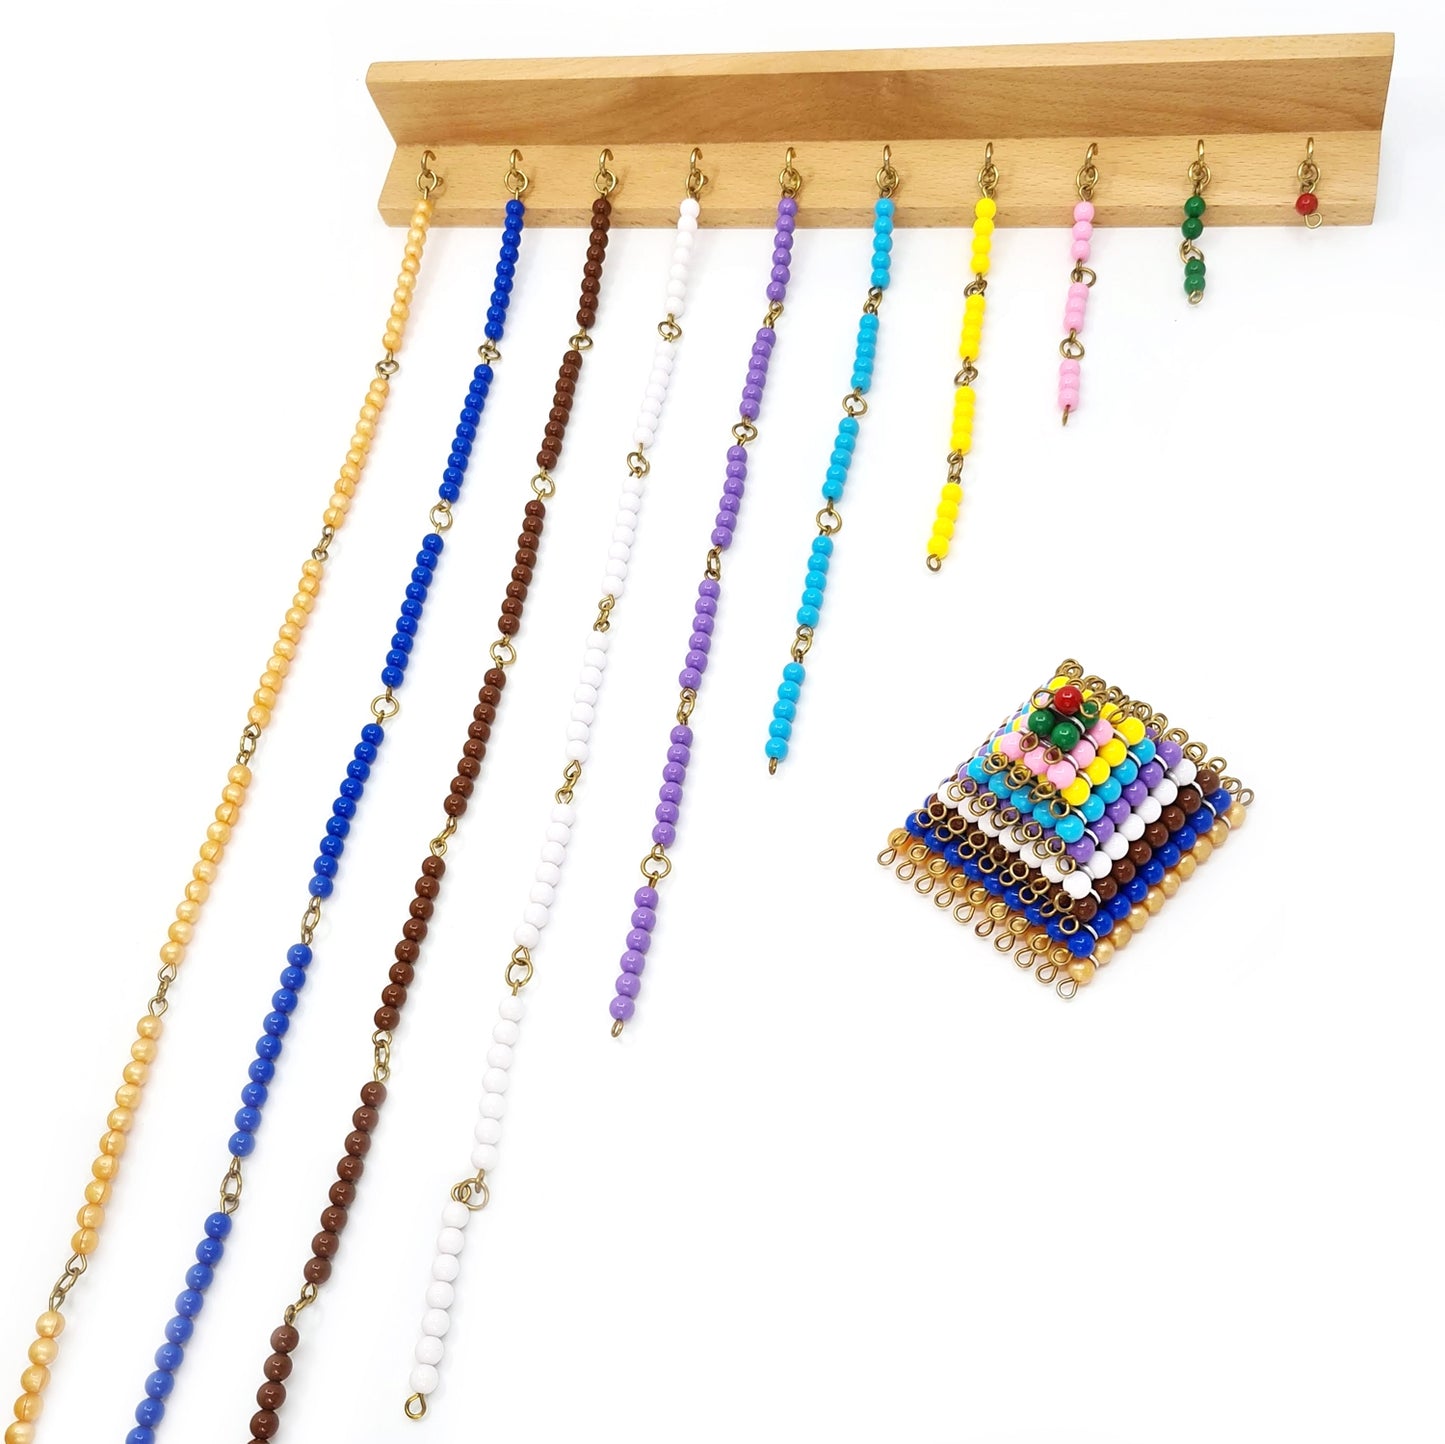 Short Bead Chains, Squares & Frame